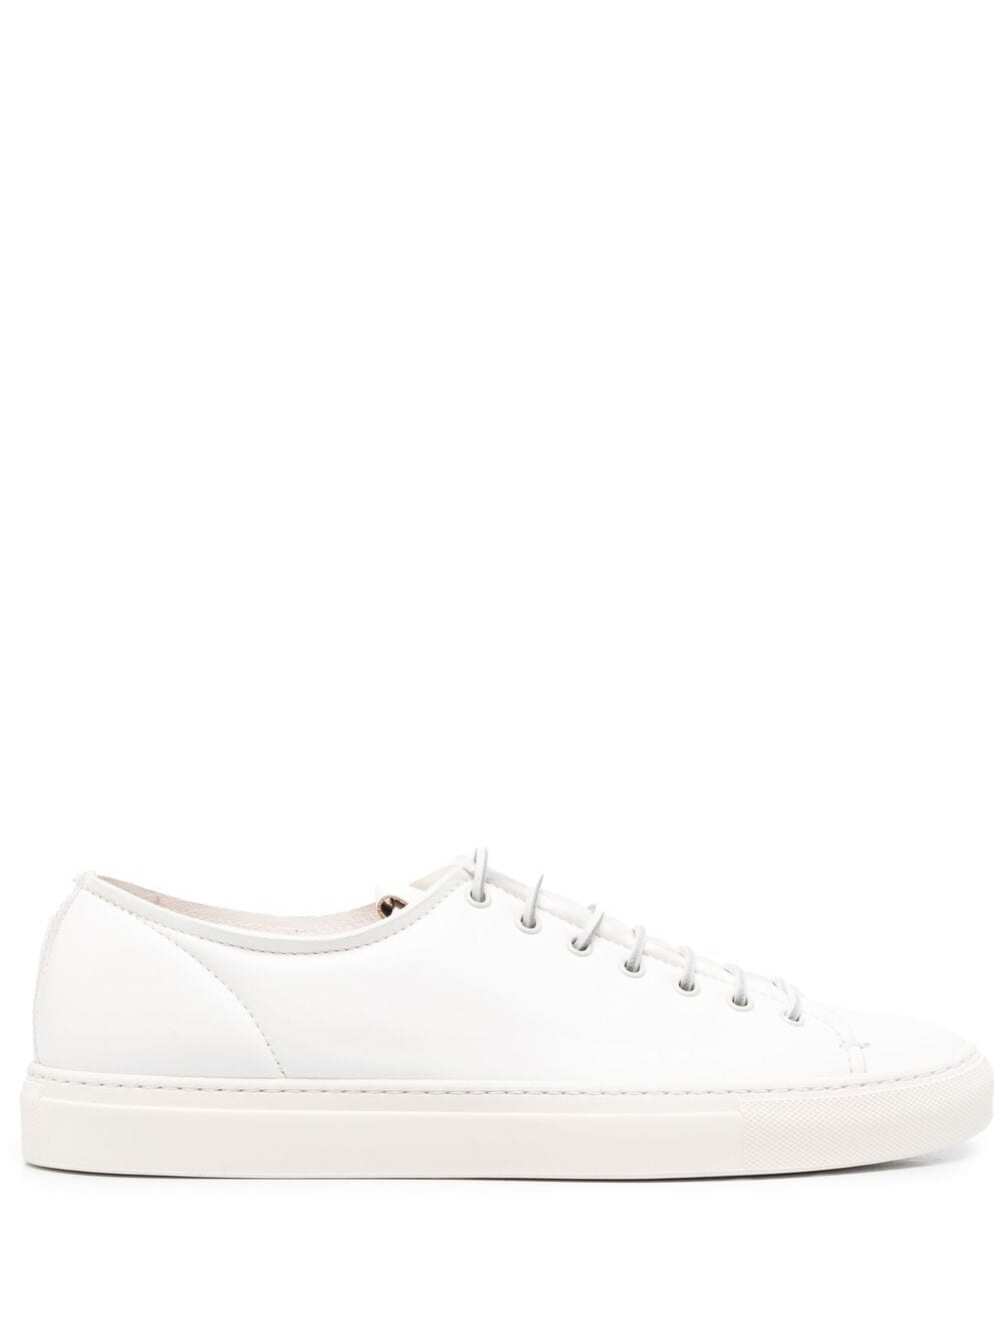 Buttero Mans Tanino White Leather Sneakers